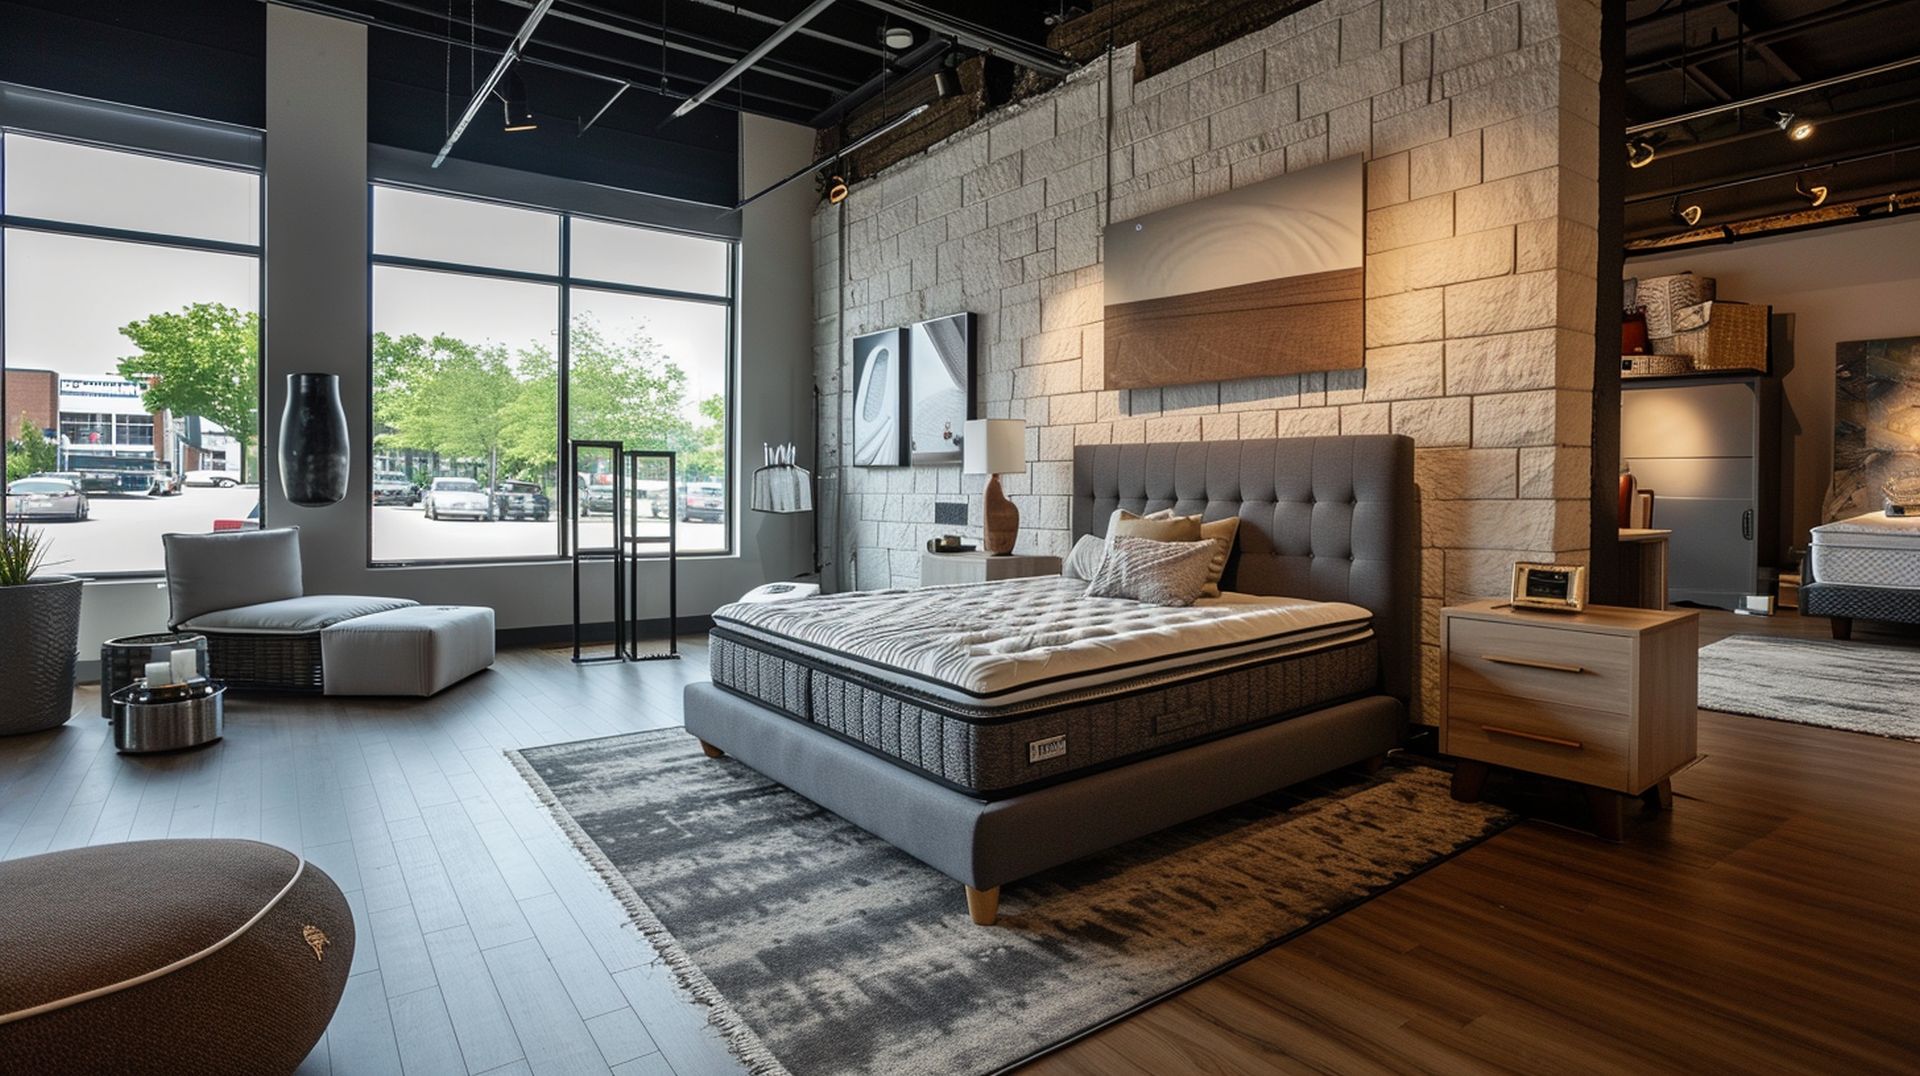 If you're looking for a new bed, mattress stores in Covina offer the best customer and delivery service, financing, and warranties in California